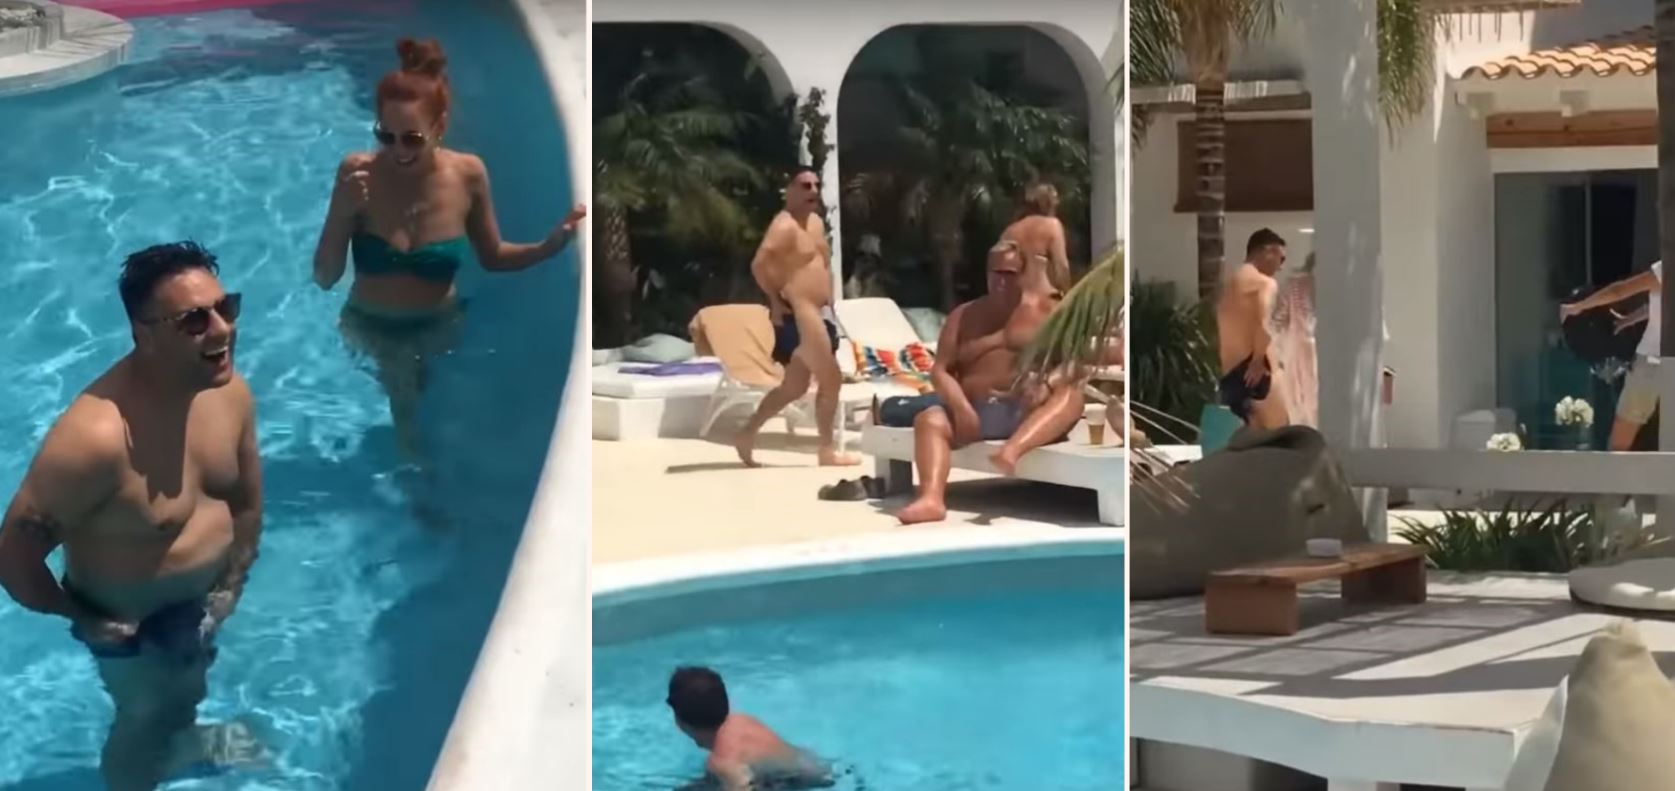 Bloke’s mates prank him with dissolvable swimming shorts while on holiday